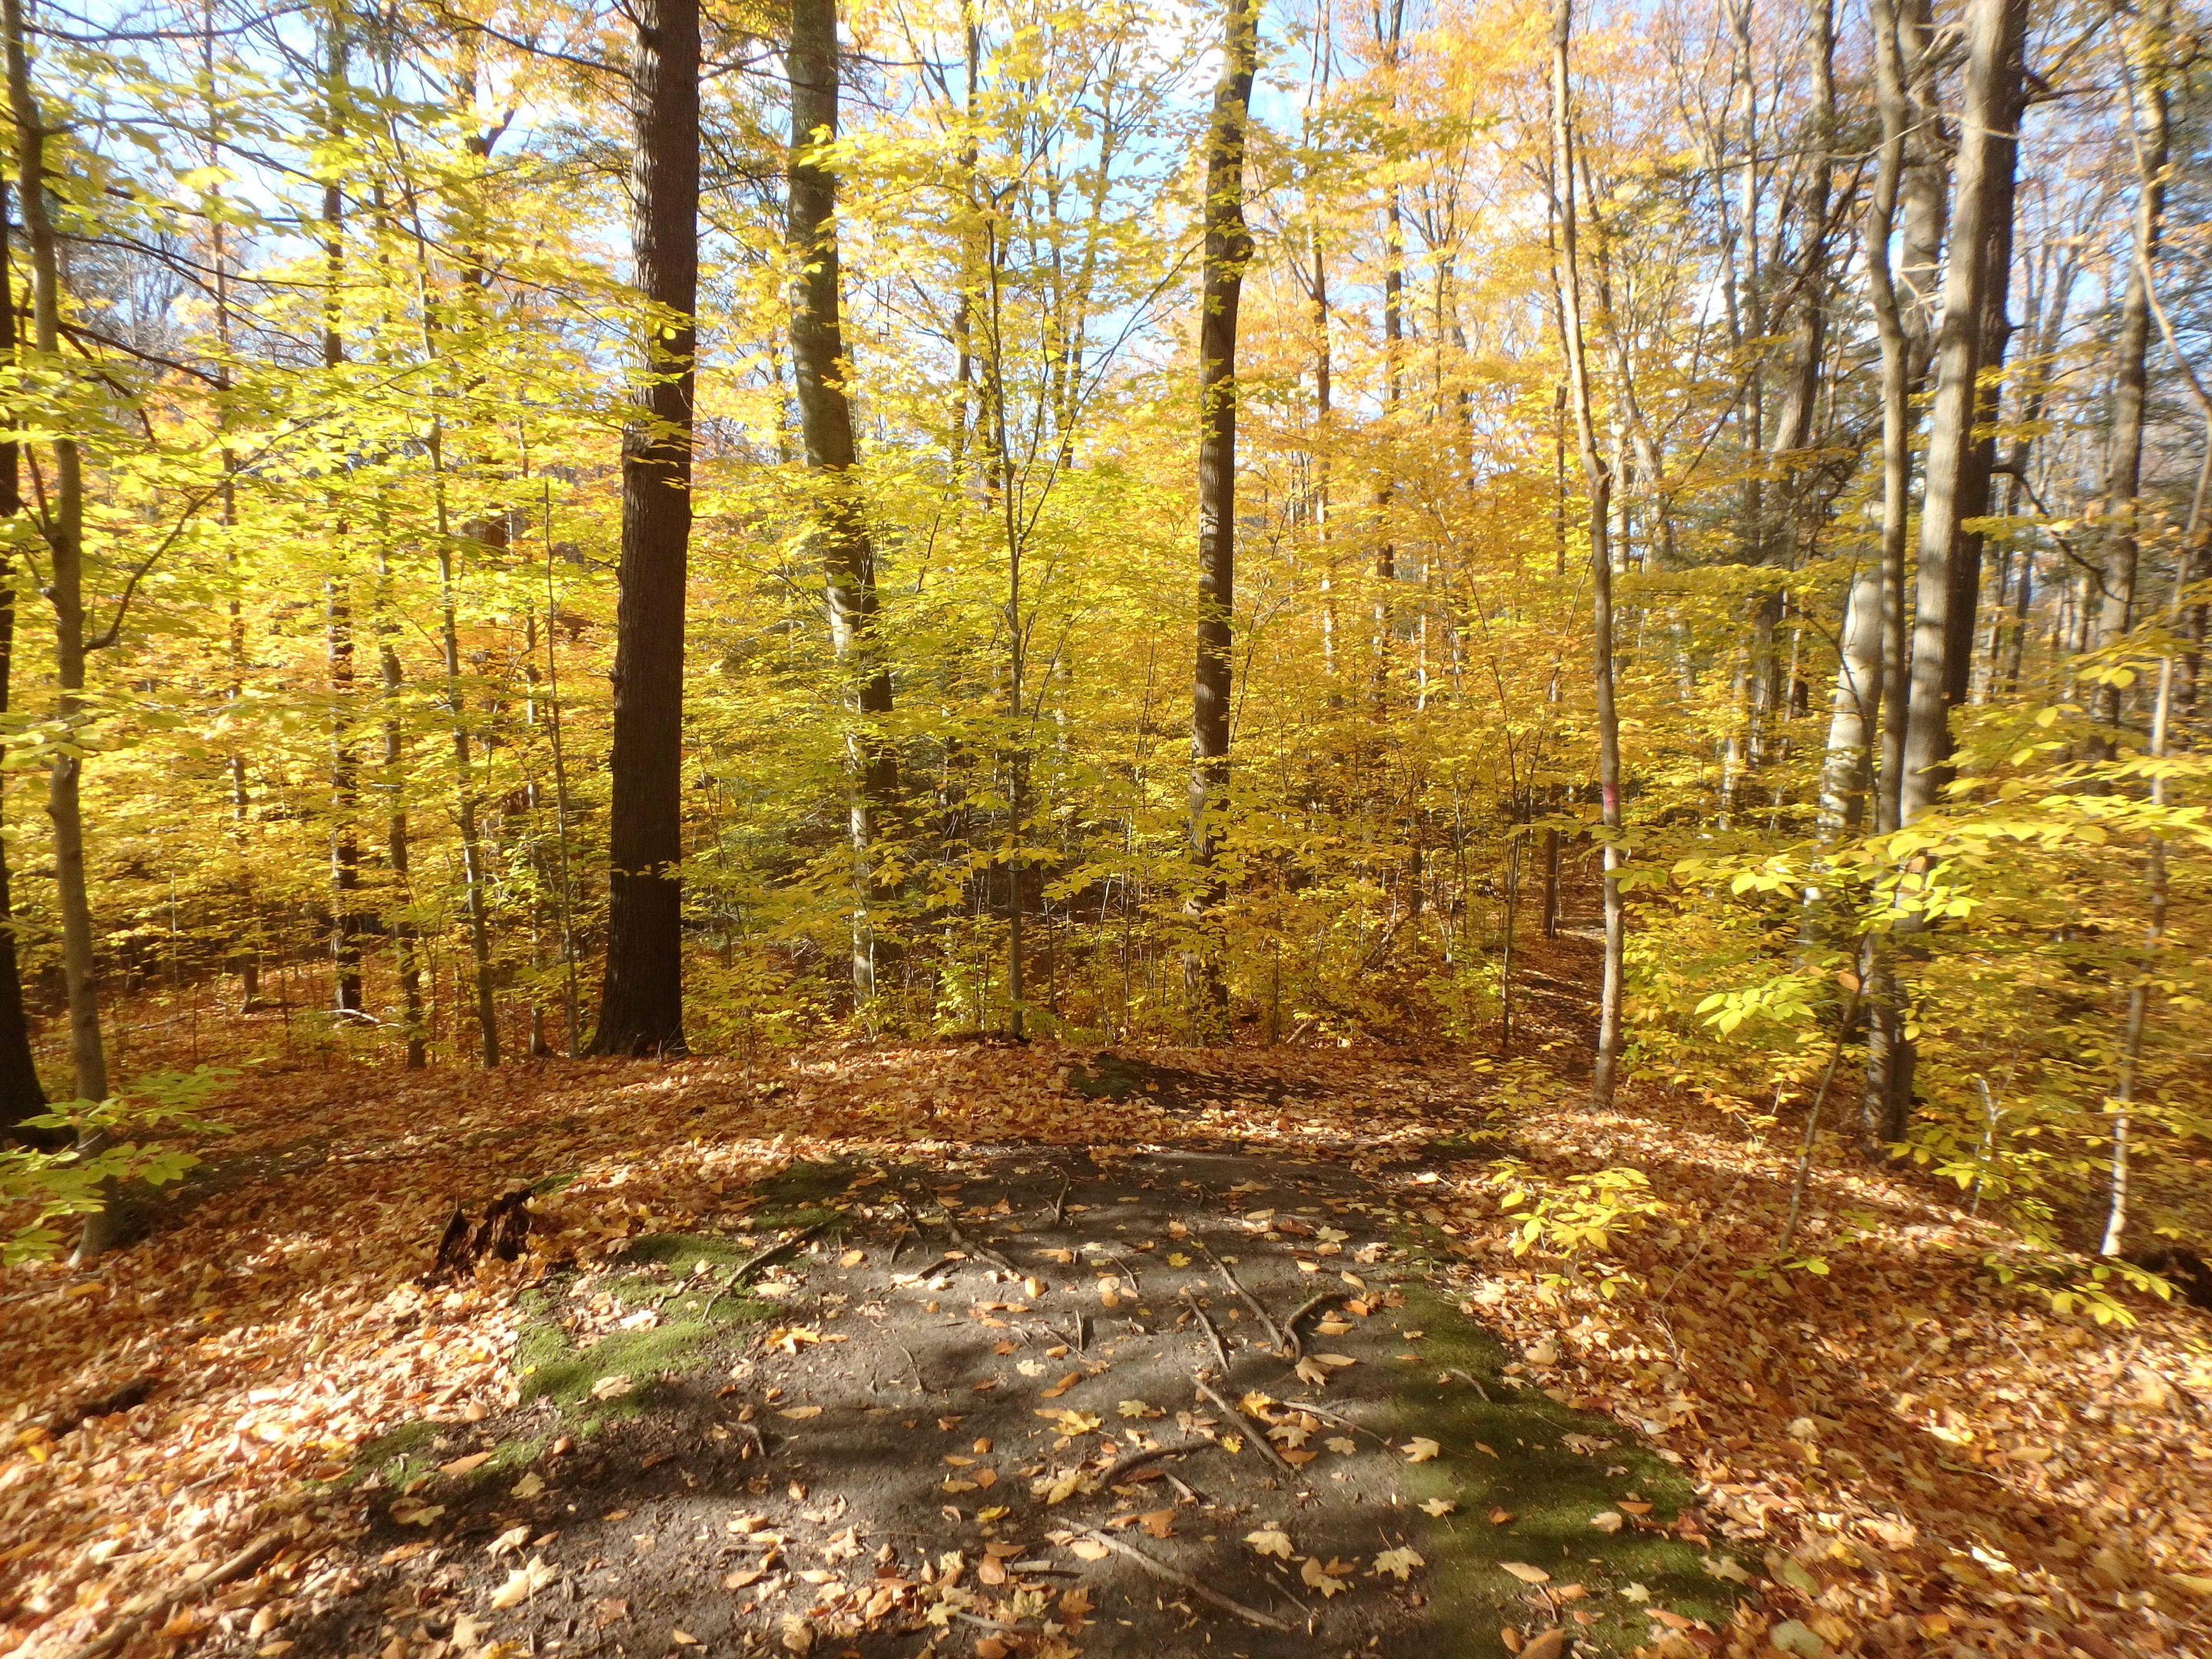 A footpath traverses an autumn forest of yellow leaves. The forest is lit by late afternoon sun.